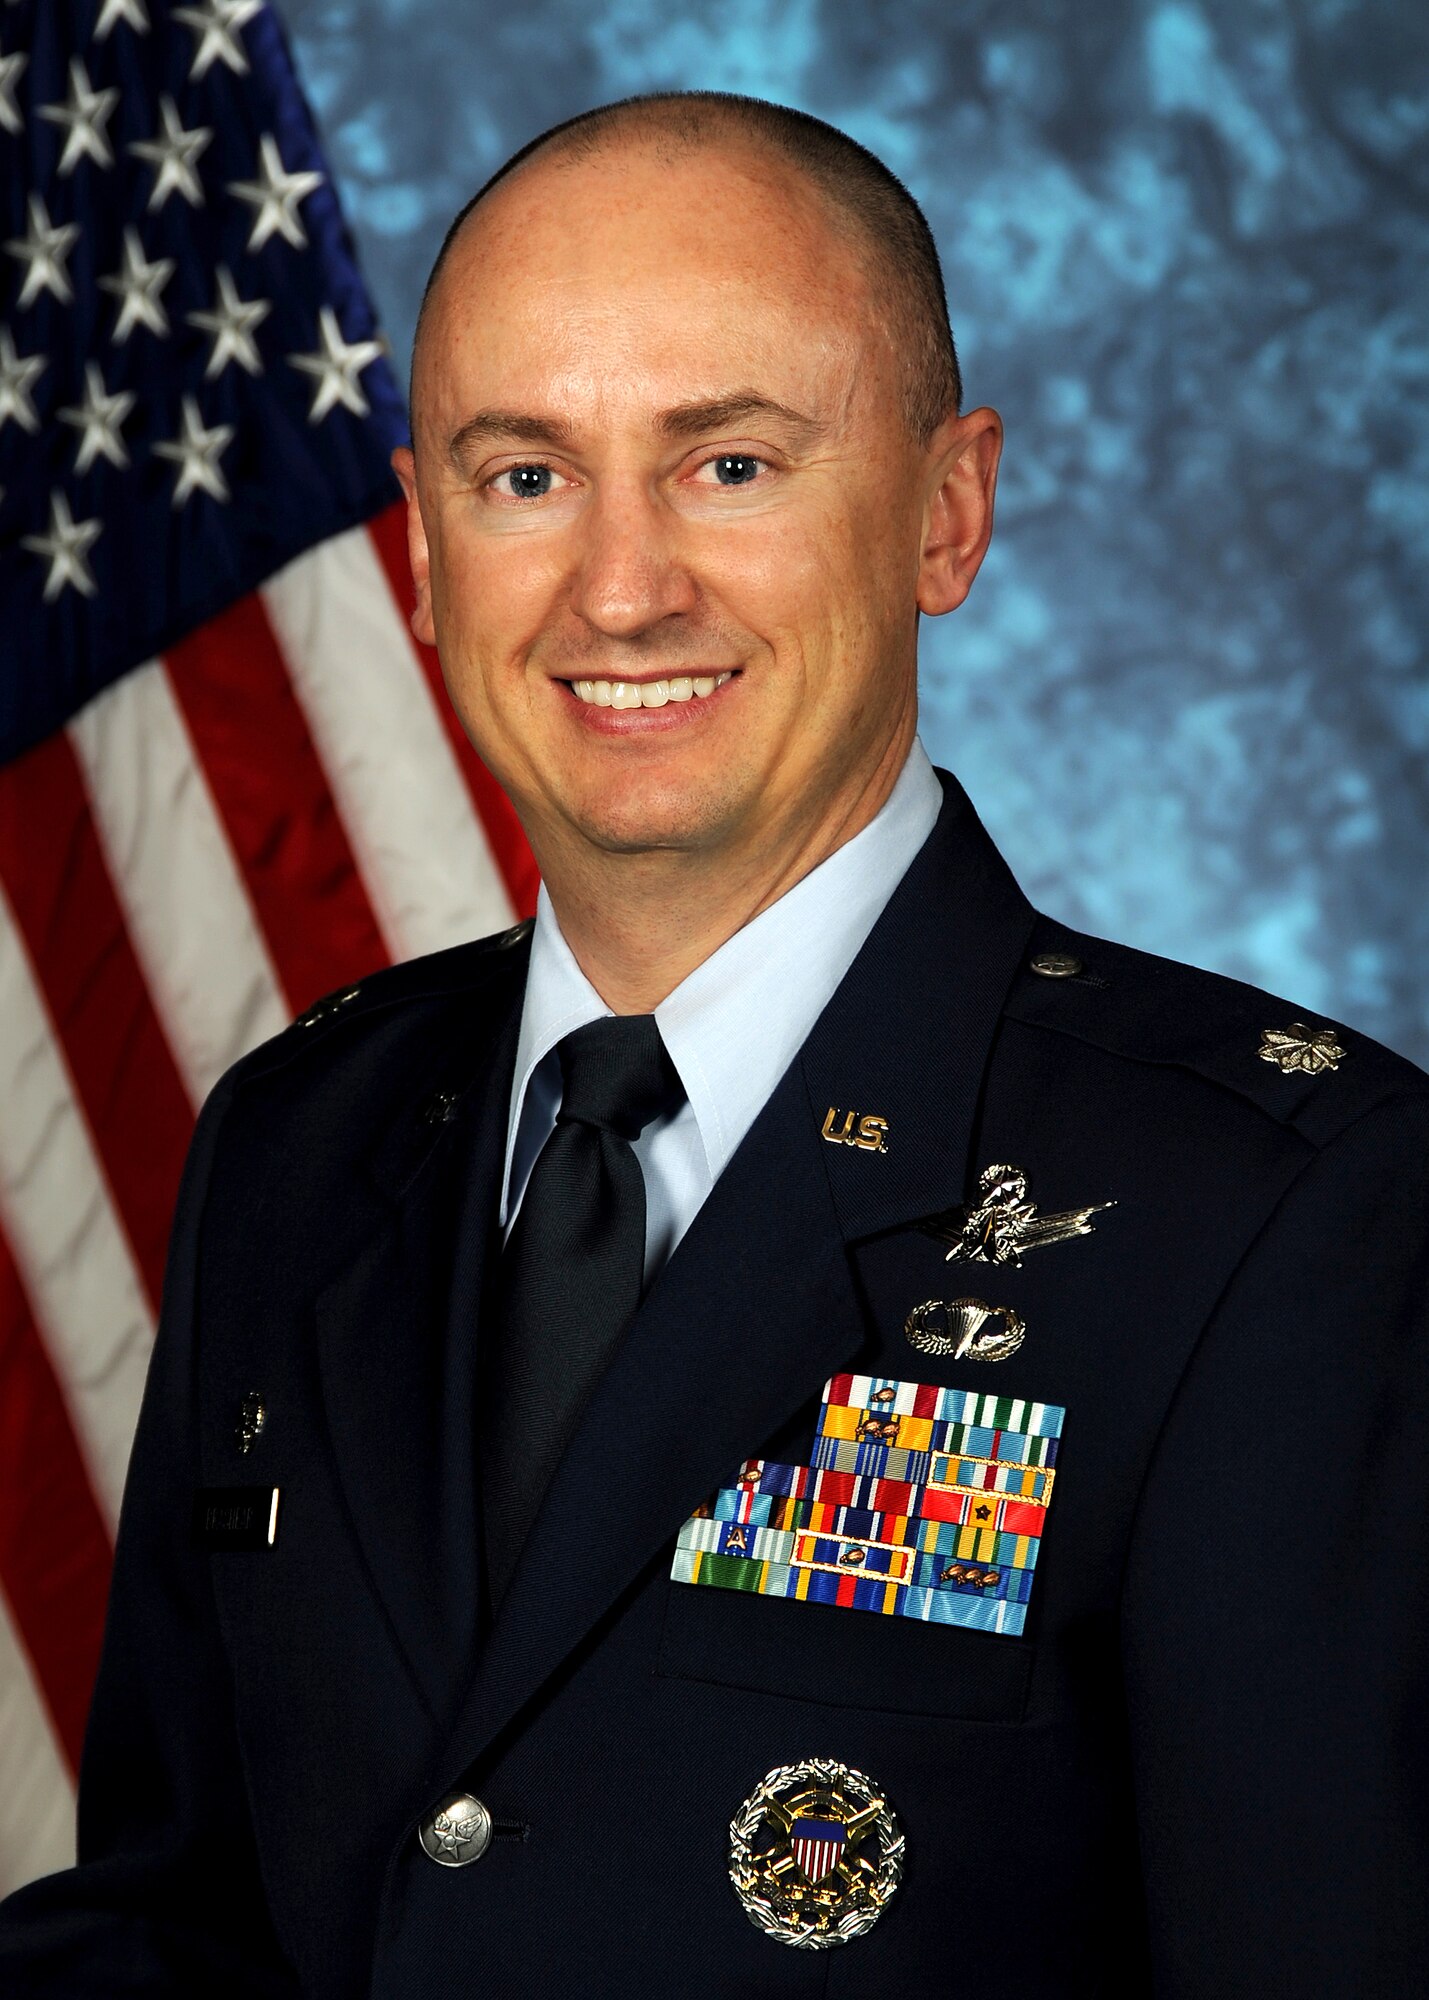 Lt. Col. Troy Brashear, Defense Meteorological Satellite Squadron, was recently awarded the 2009 American Marshall Memorial Fellowship.  Along with 52 other selectee from throught the United States, he will be traveling to Europe on a 24-day program to develop knowledge of political, economic, and social issues facing the U.S. and Europe.